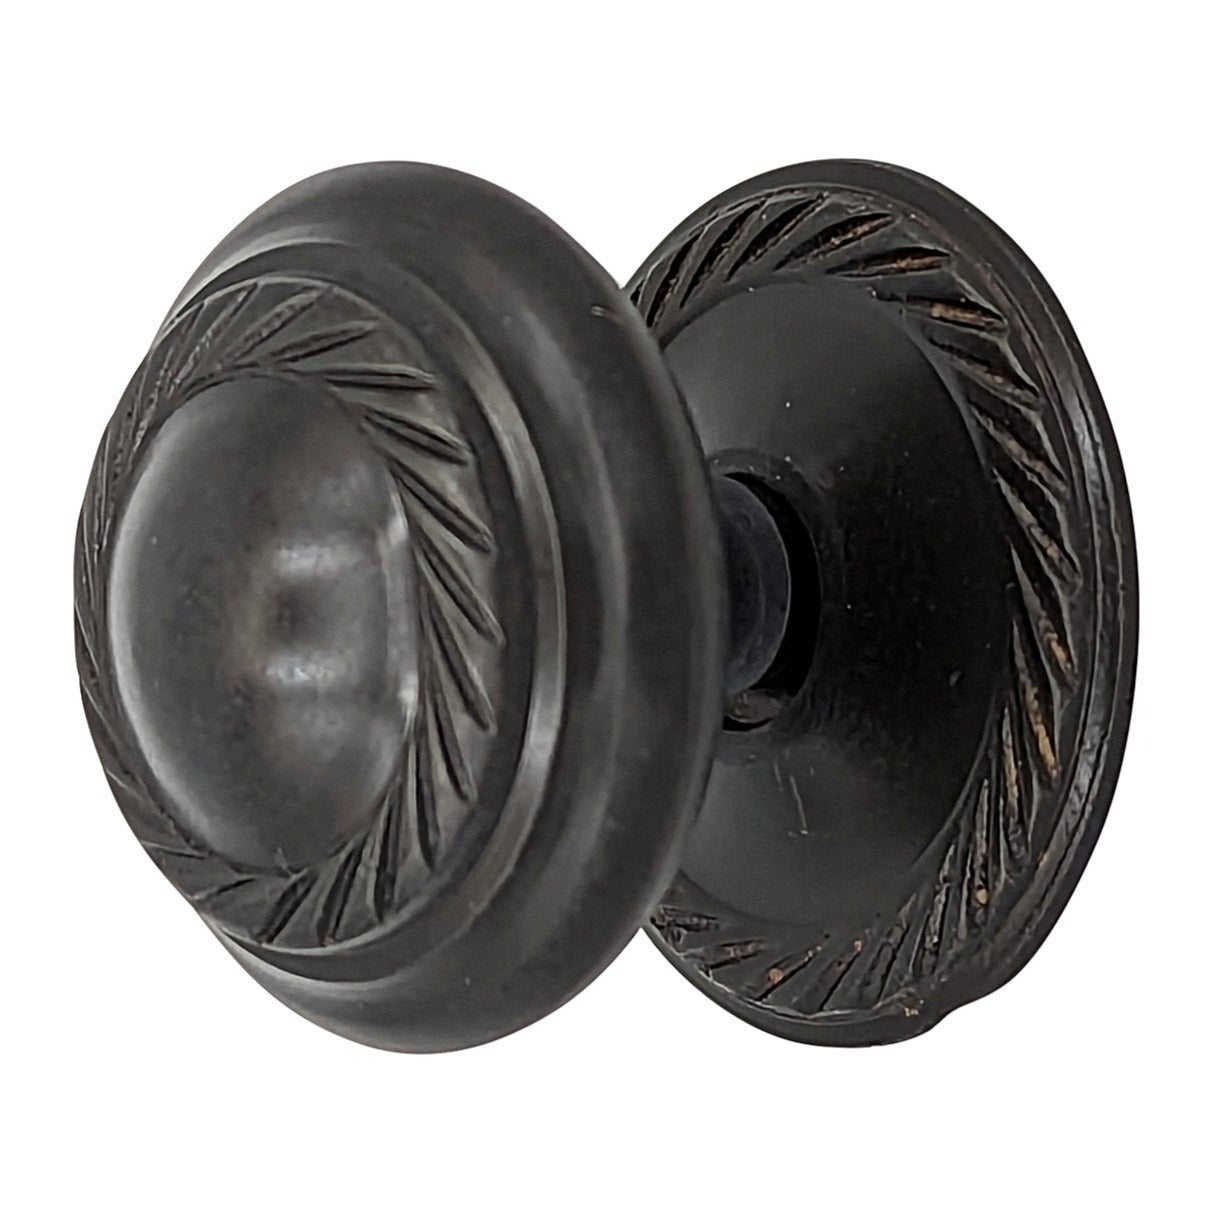 1 1/2 Inch Georgian Roped Cabinet Knob with Backplate (Several Finishes Available)